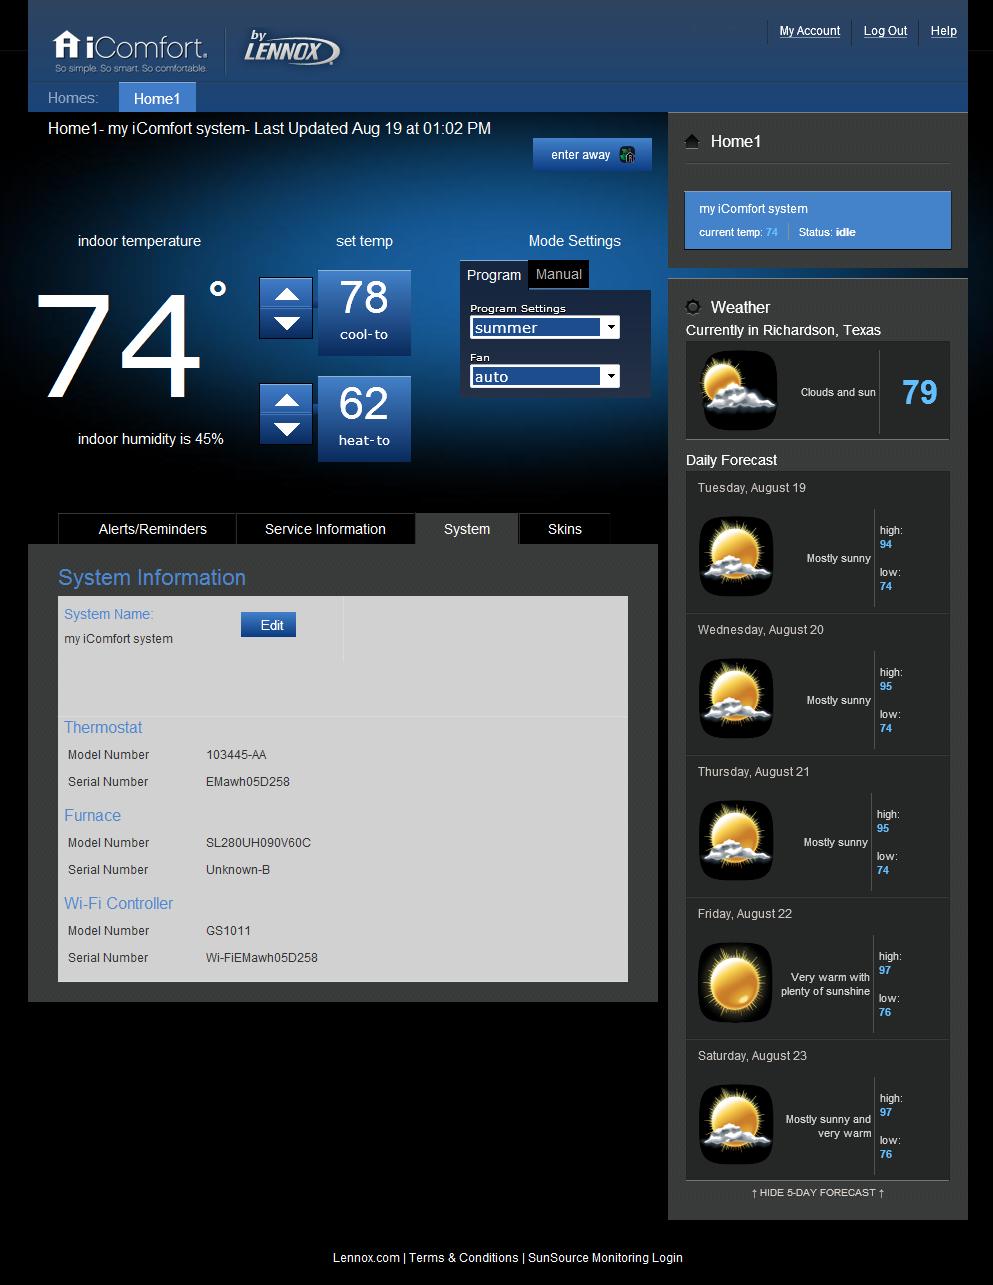 HOMEOWNER REMOTE ACCESS WEBSITE DASHBOARD Remotely control any icomfort Wi-Fi Thermostat on a home wireless network. Accessible to the homeowner at: www.myicomfort.com. Tabs at the top for different locations (Home 1, Home 2, etc.